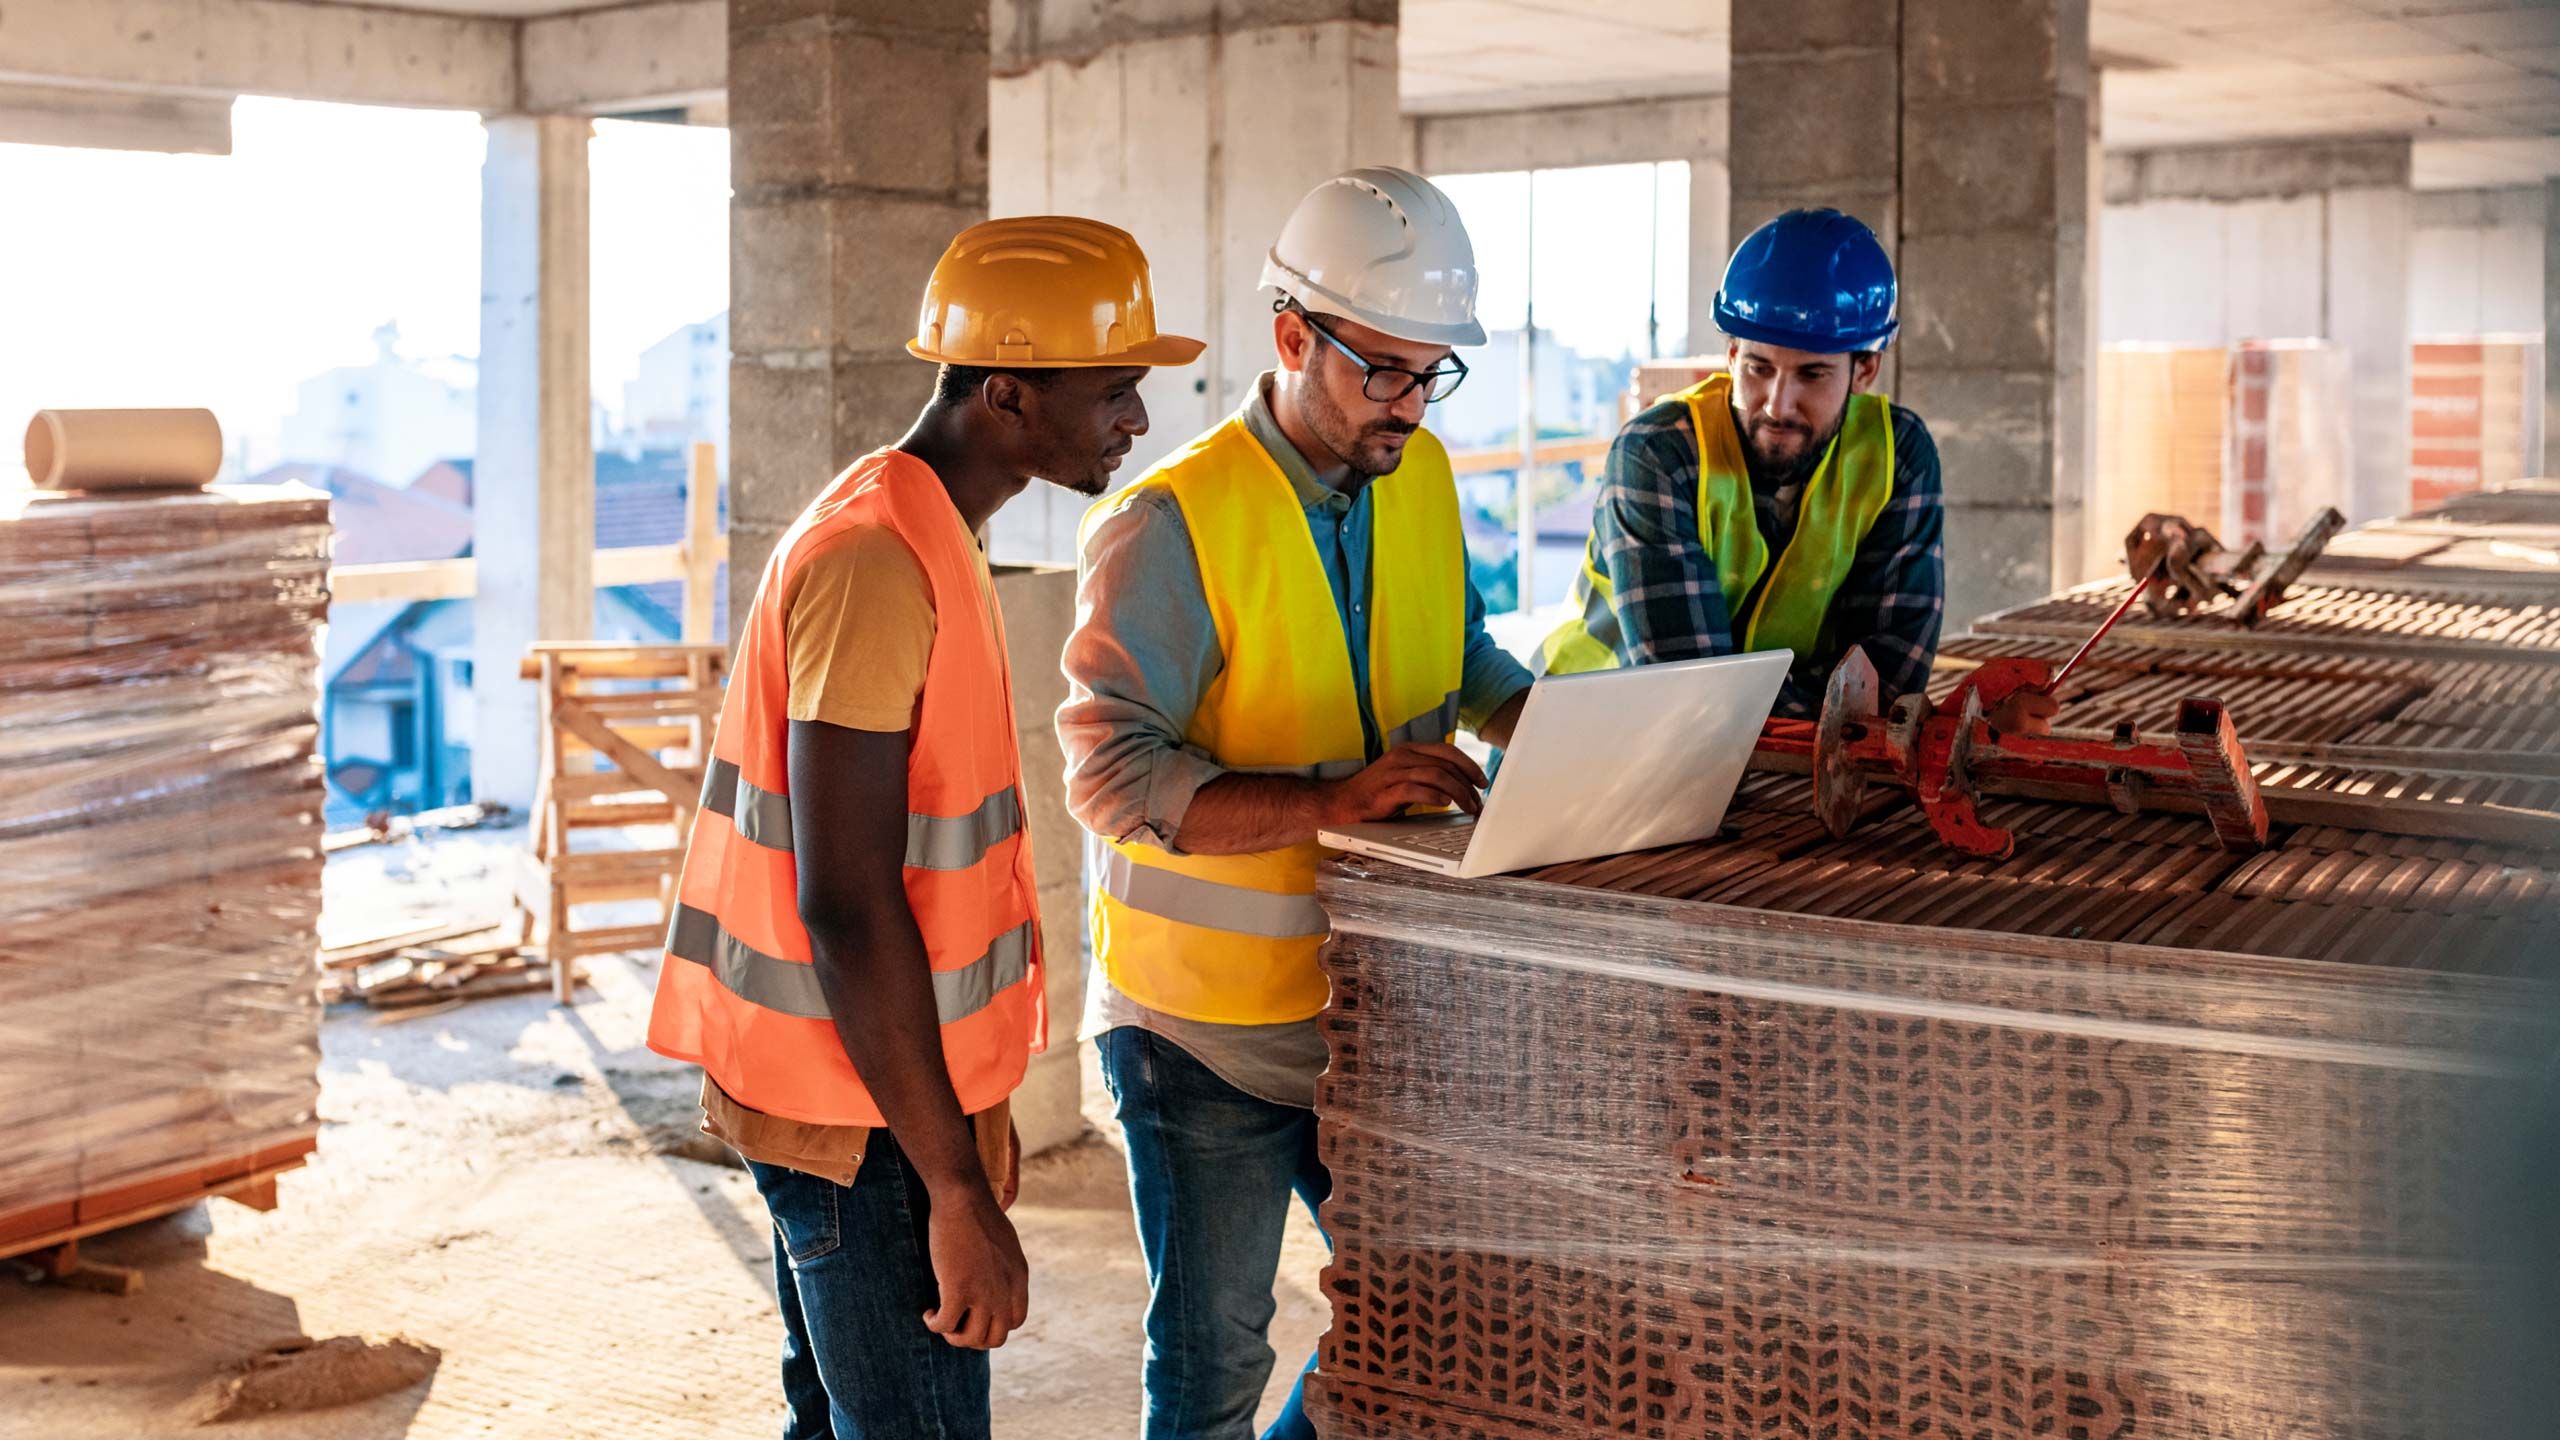 Three construction workers wearing hard hats and safety vests looking at a laptop